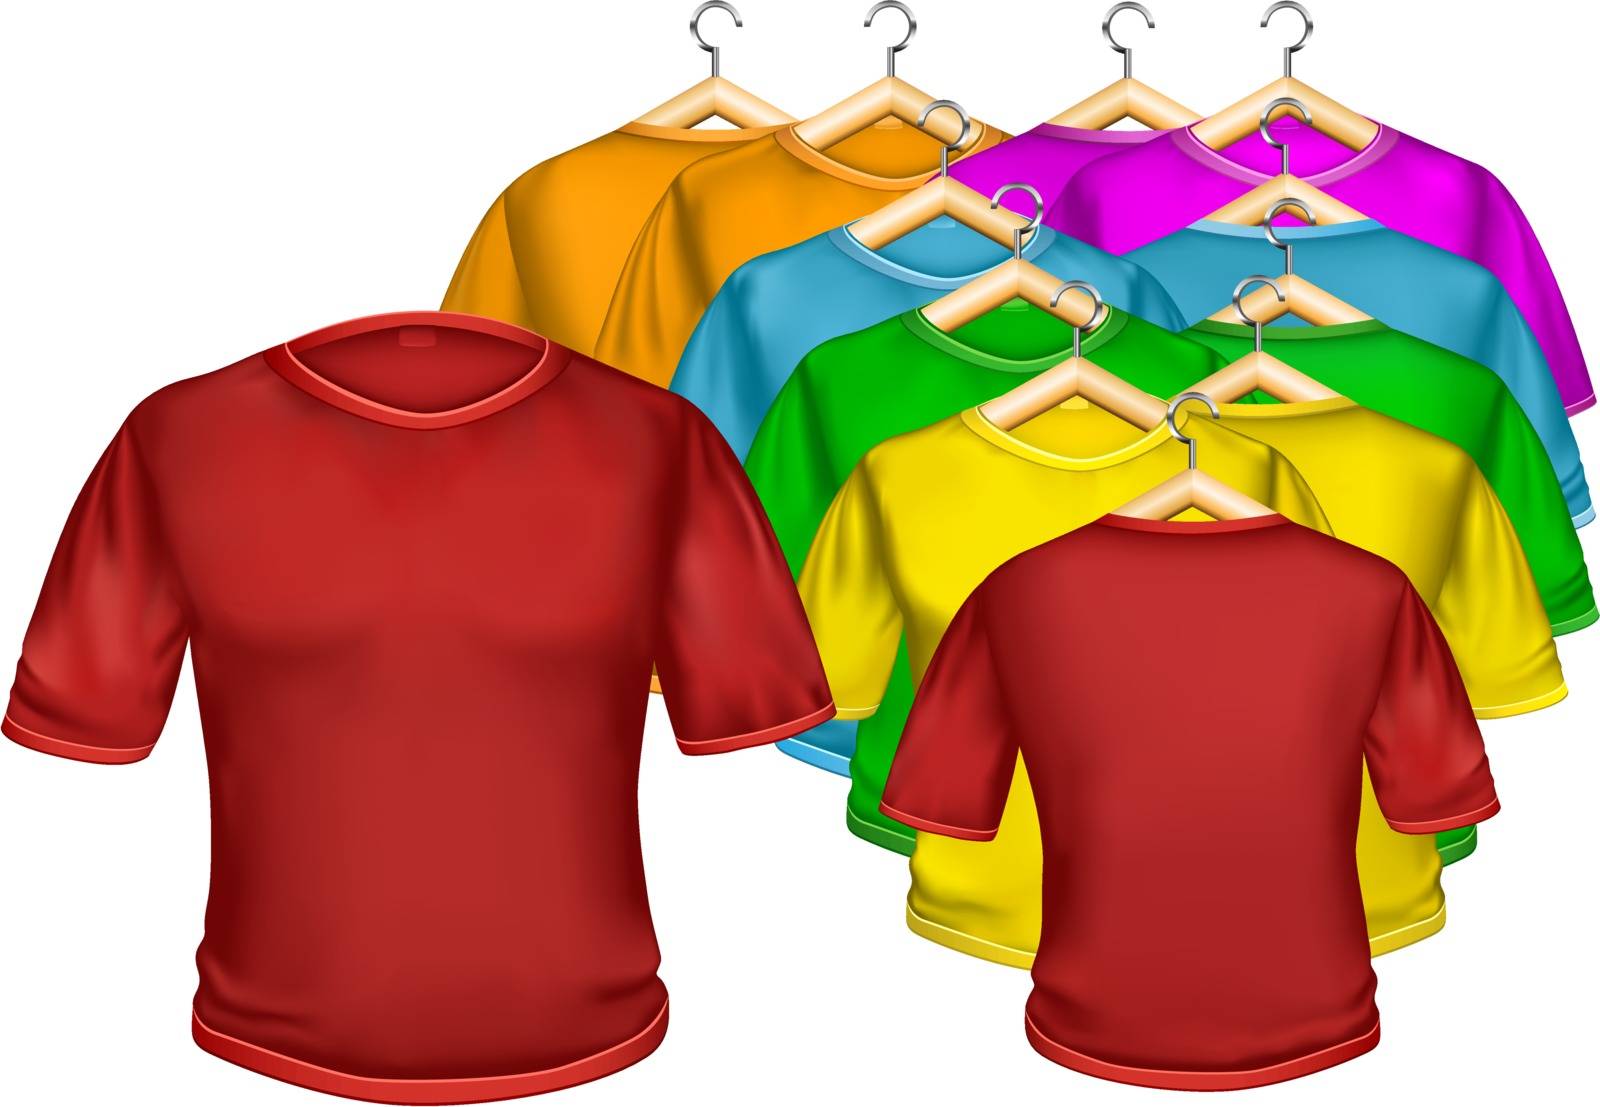 The multicolored t-shirt isolated on the white background, for your creativity: drawings, logos, text, etc.